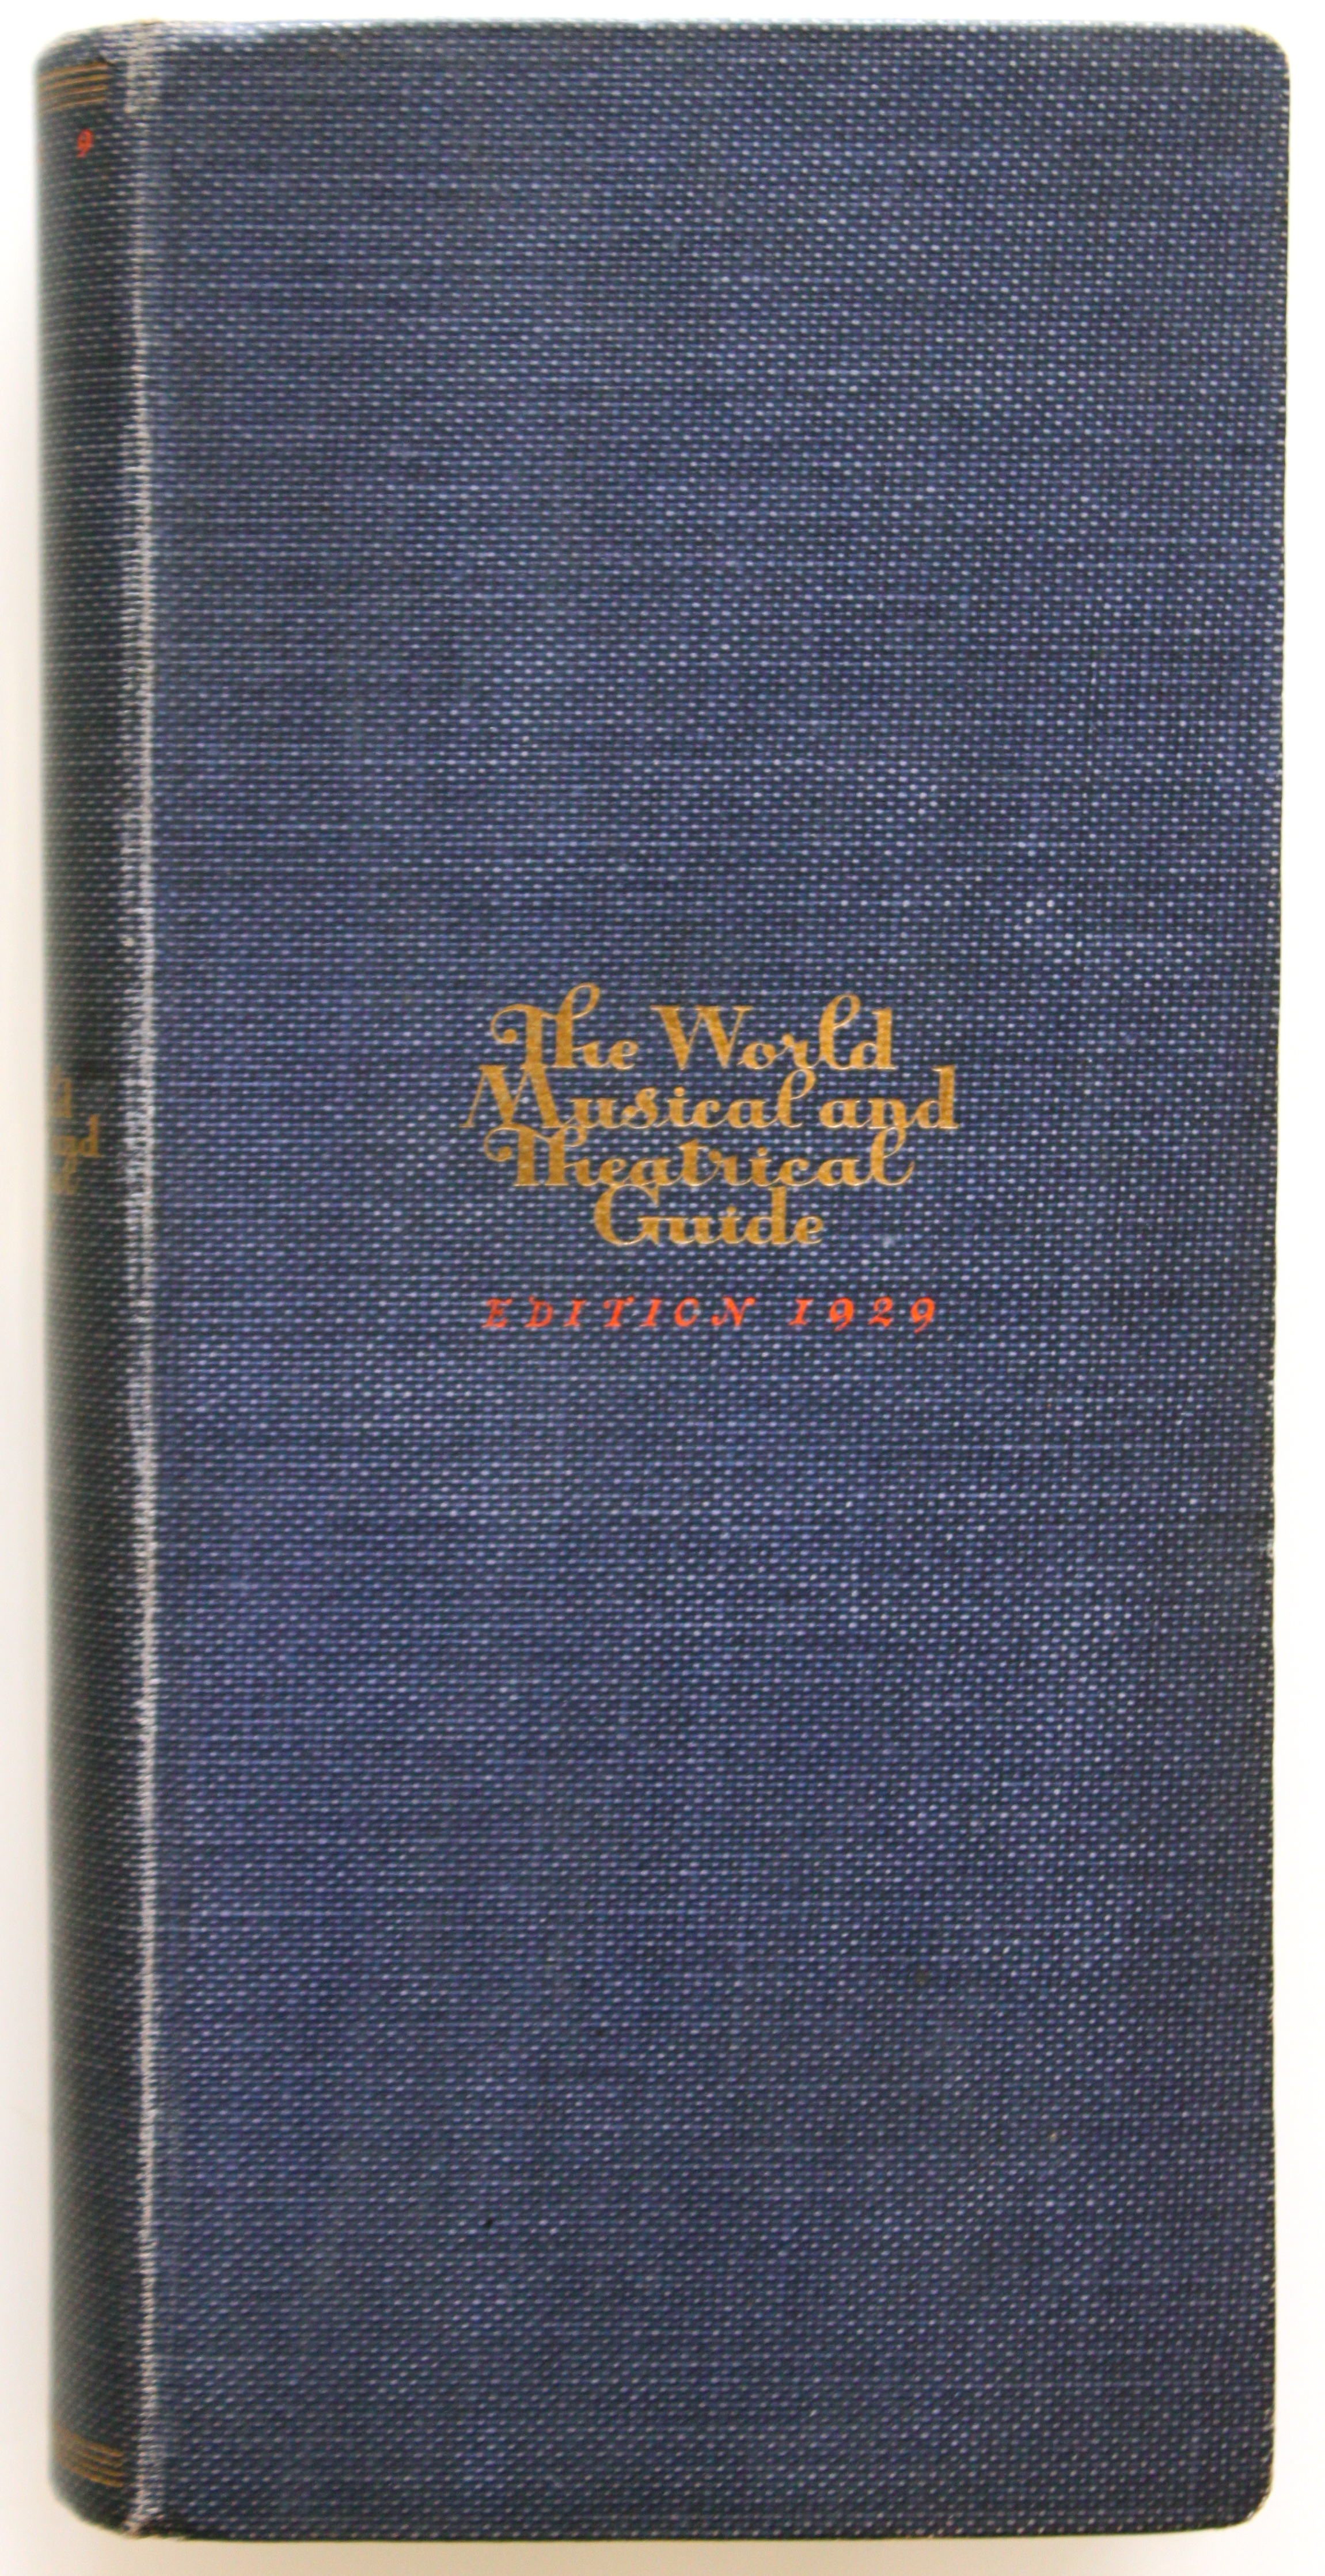 Norbert Salter, The World Musical and Theatrical Guide, New York 1929